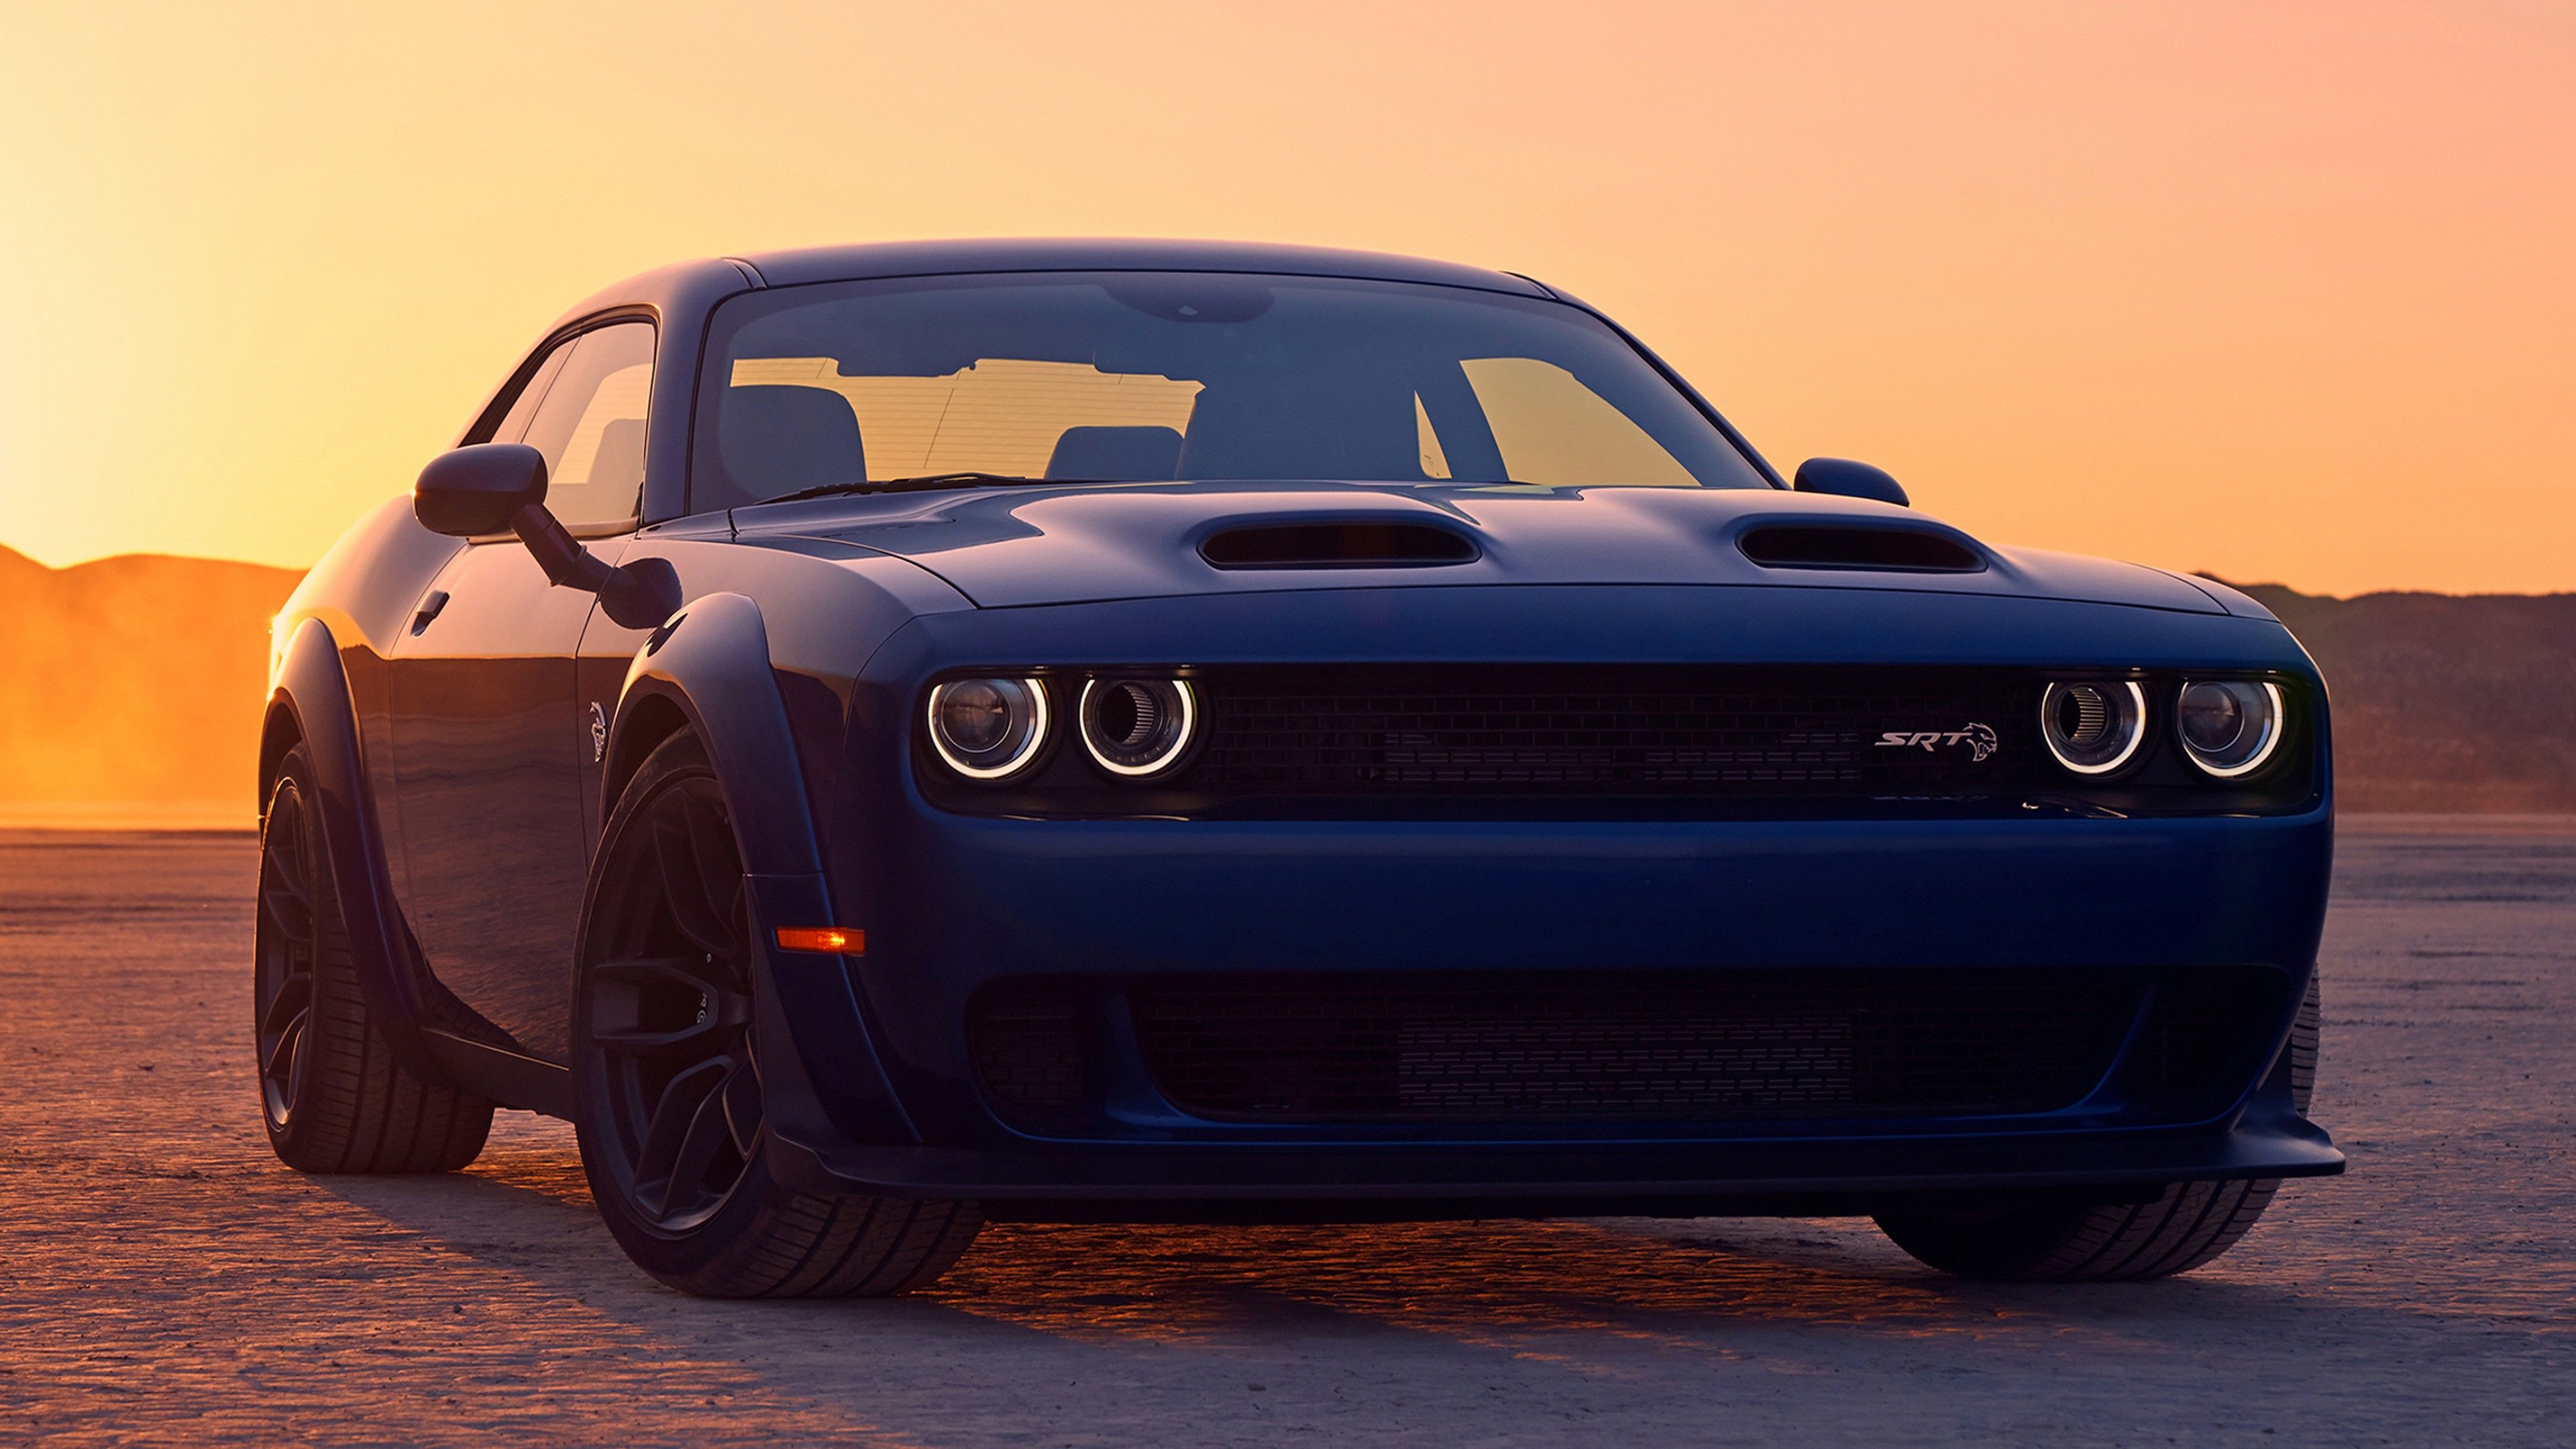 Dodge Challenger HD Wallpapers Free Download 